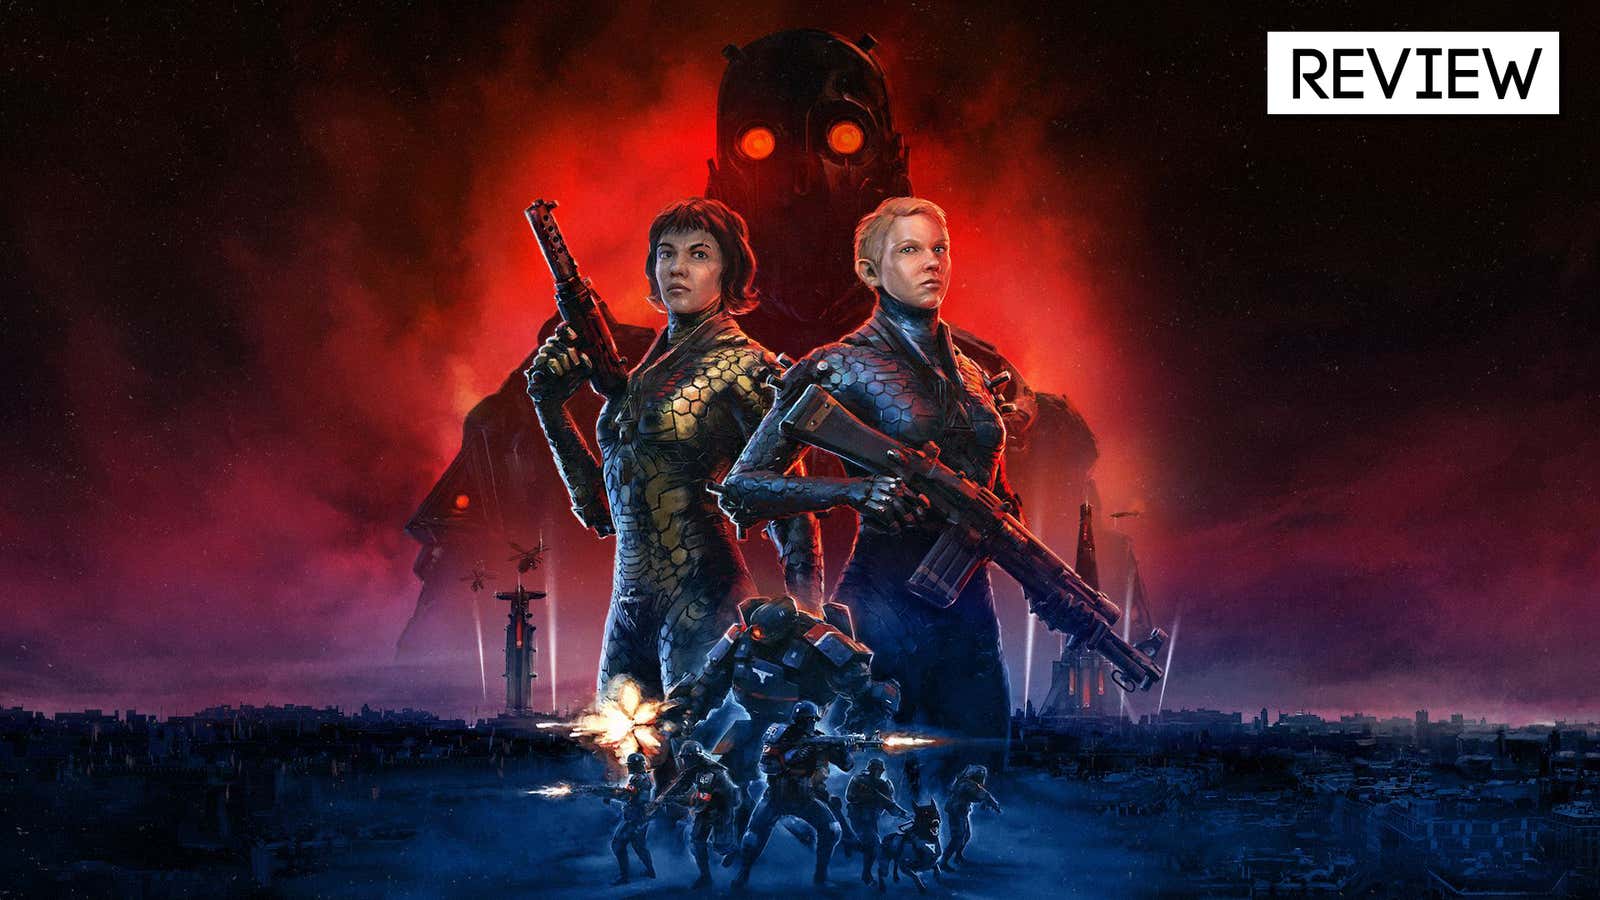 Wolfenstein: The New Order (Review) – Sight-In Games